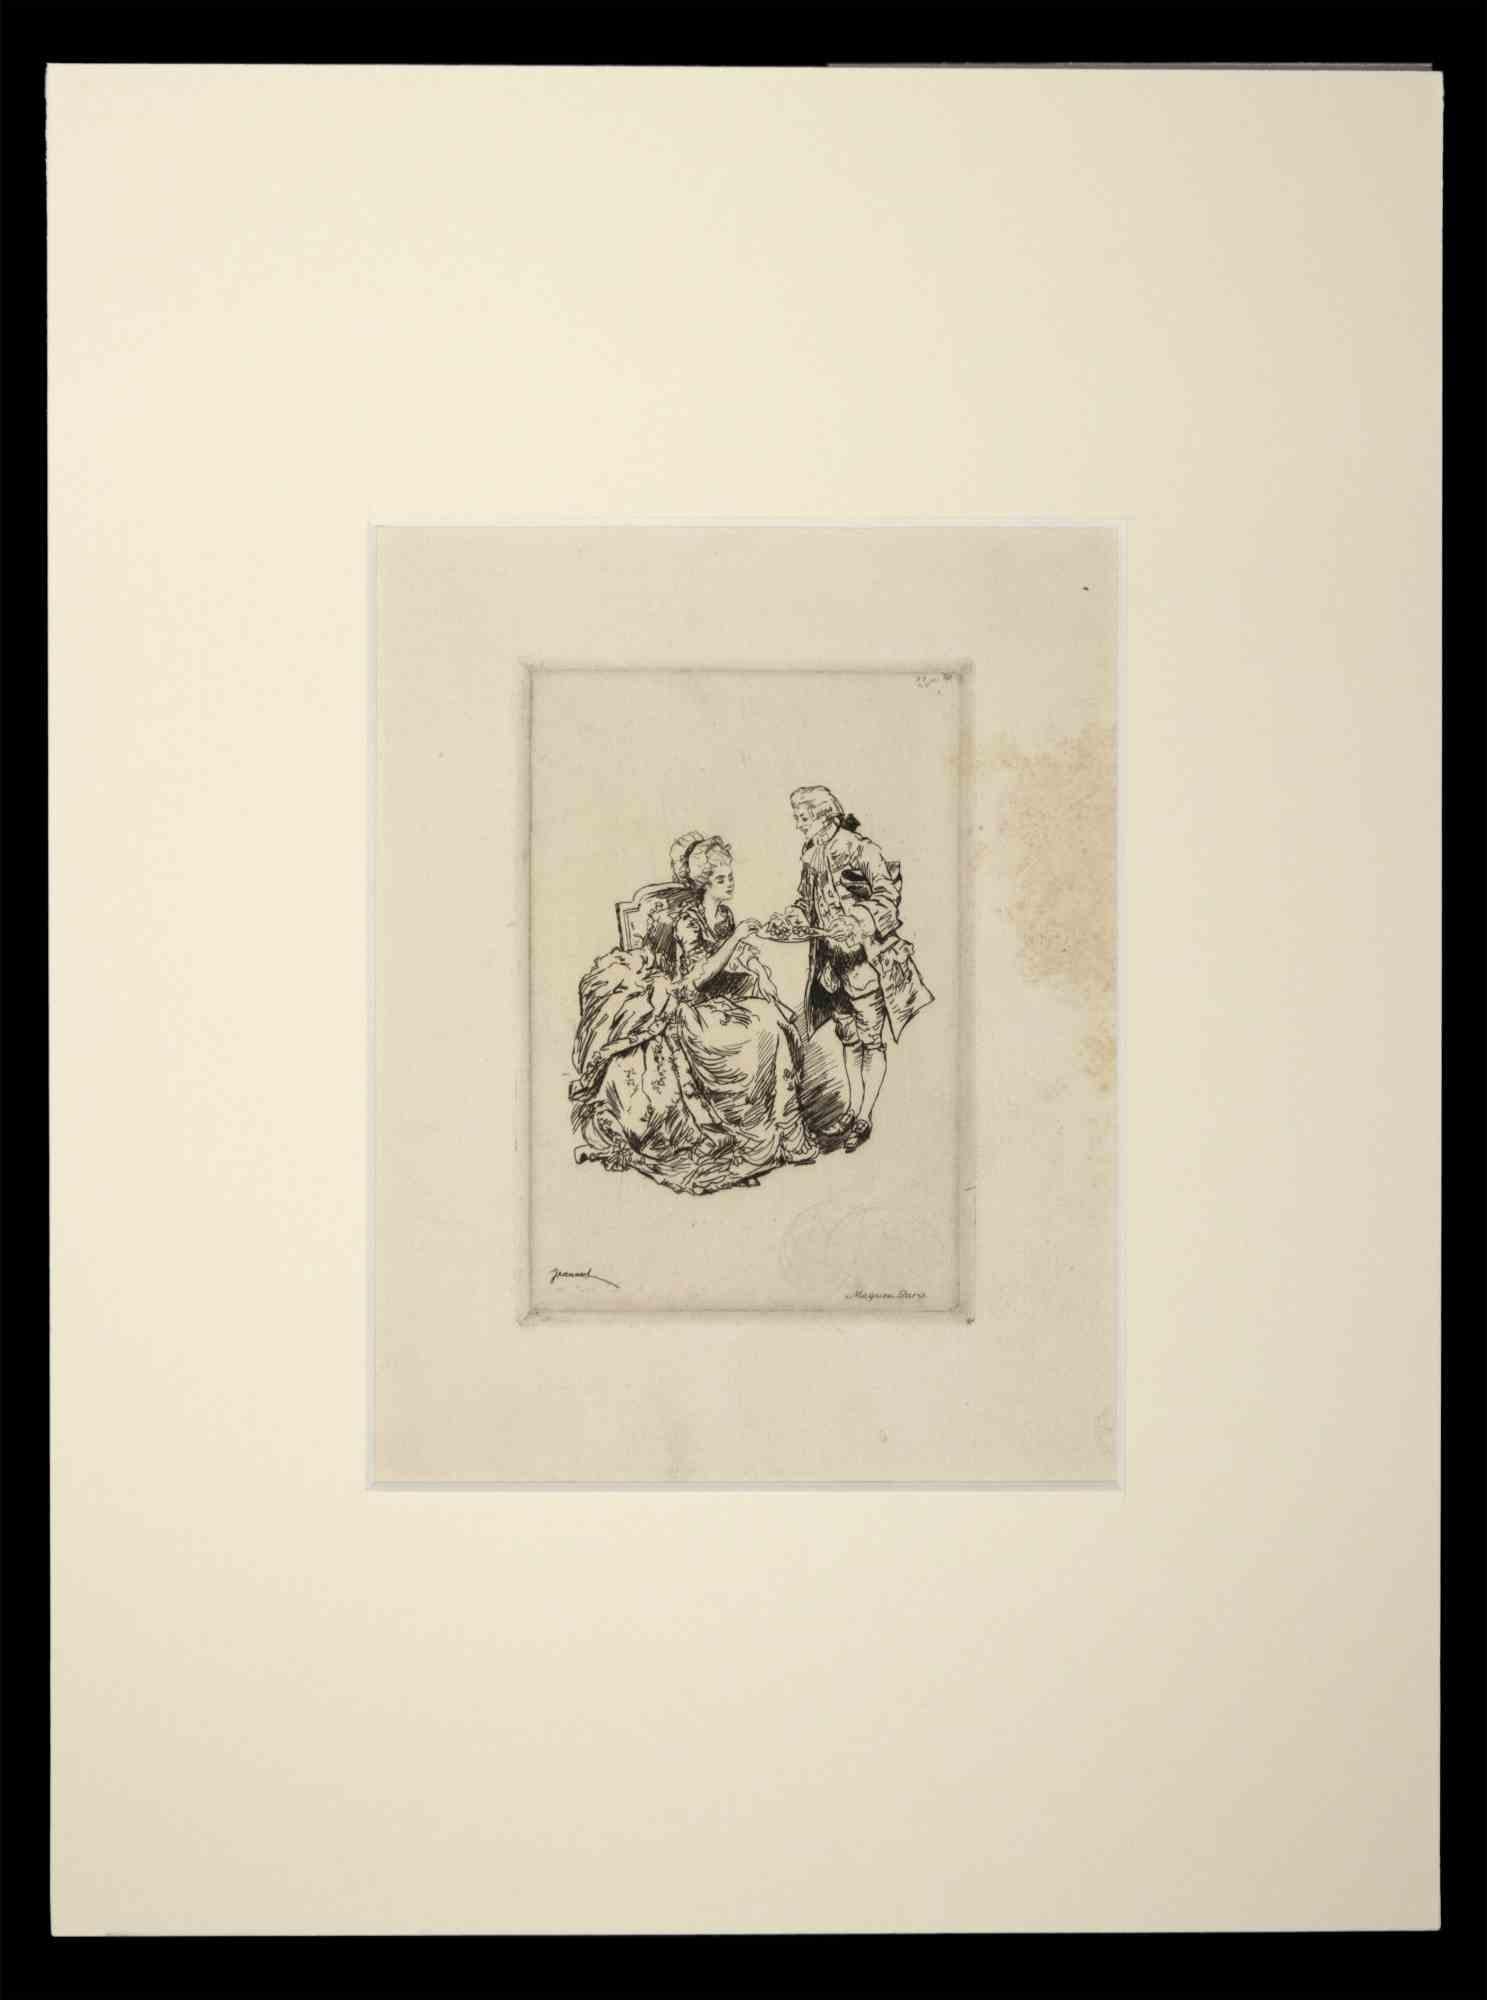 Pierre Georges Jeanniot Figurative Print - Scene from The Life of Casanova - Etching by G. Jeanniot - Early 20th Century